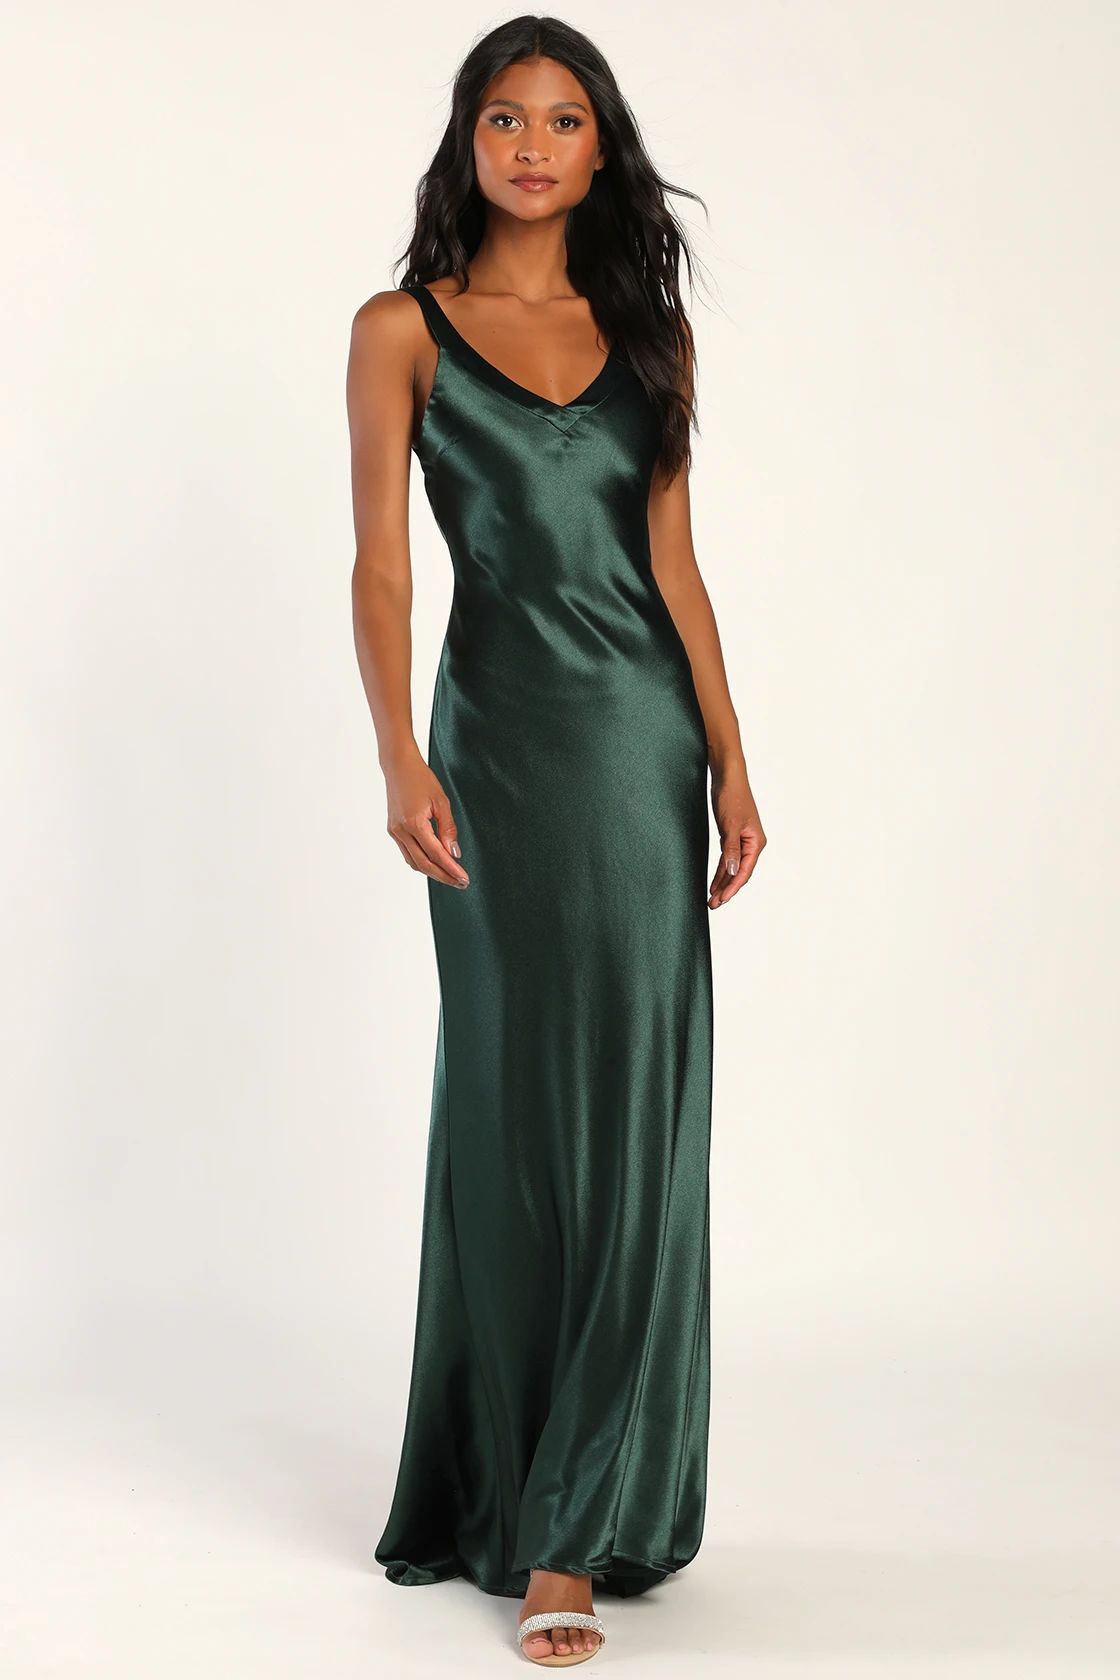 Perfectly Classy Emerald Green Satin Strappy Maxi Dress | Lulus (US)